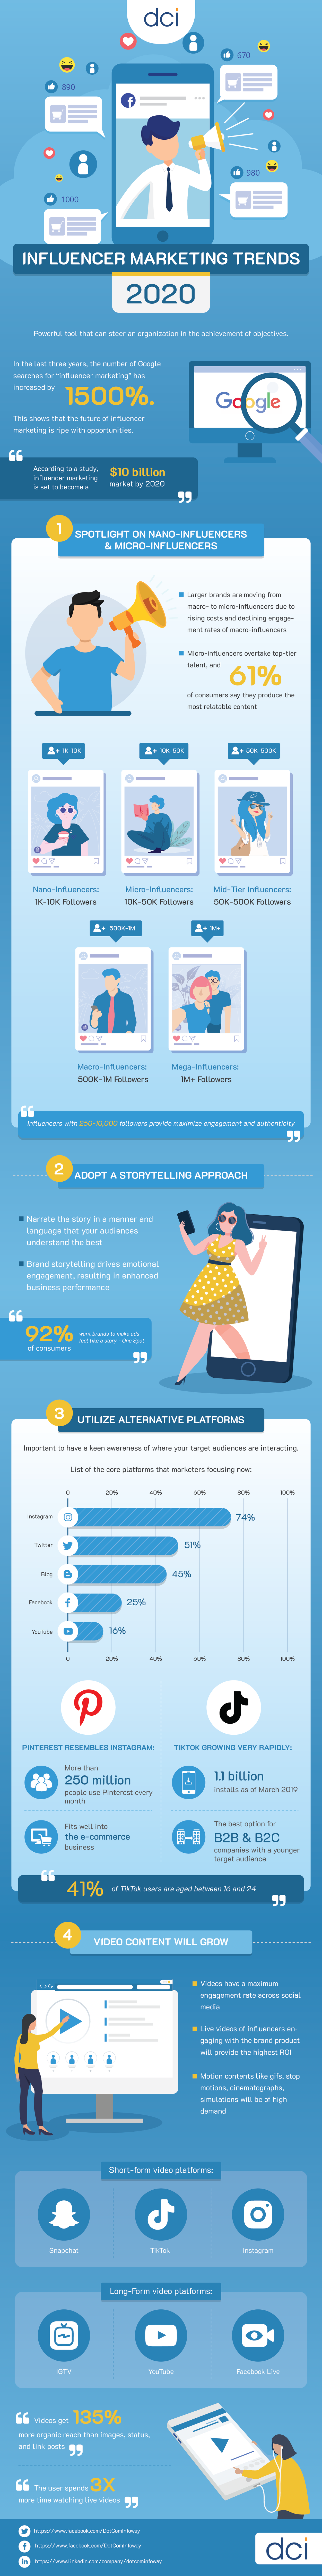 Infographic On Influencer Marketing 2020